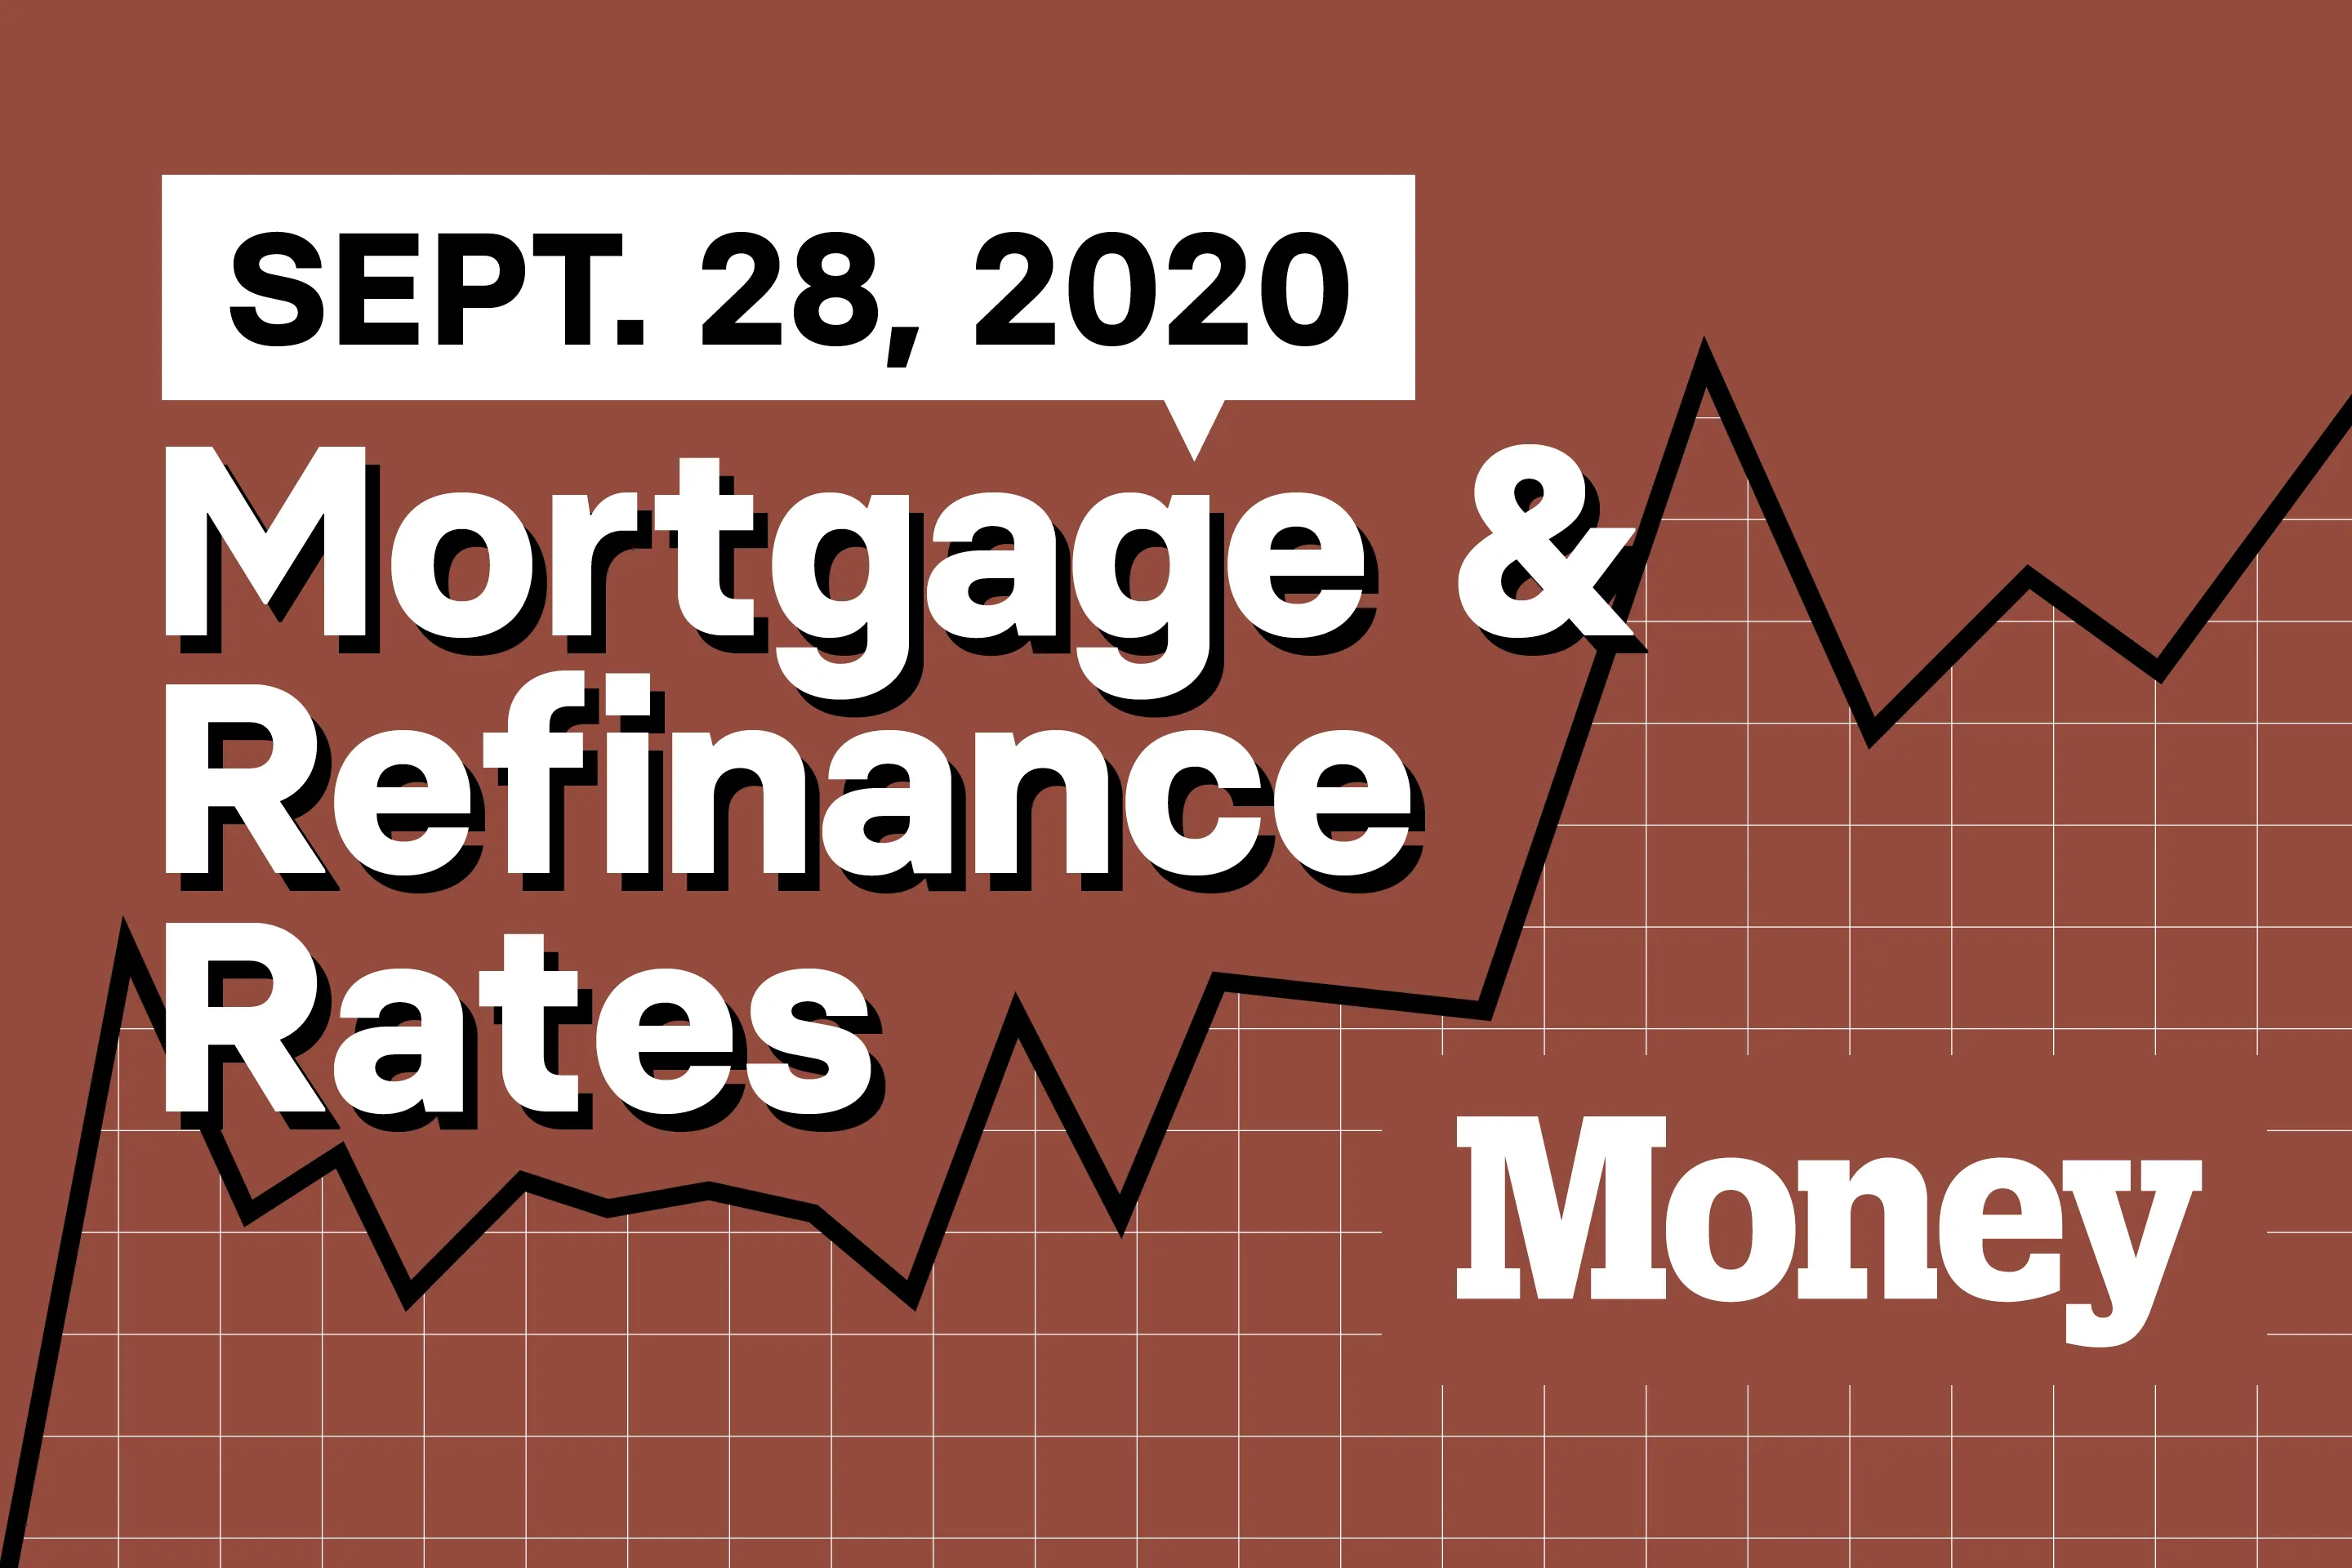 Here Are Today's Best Mortgage & Refinance Rates for September 28, 2020